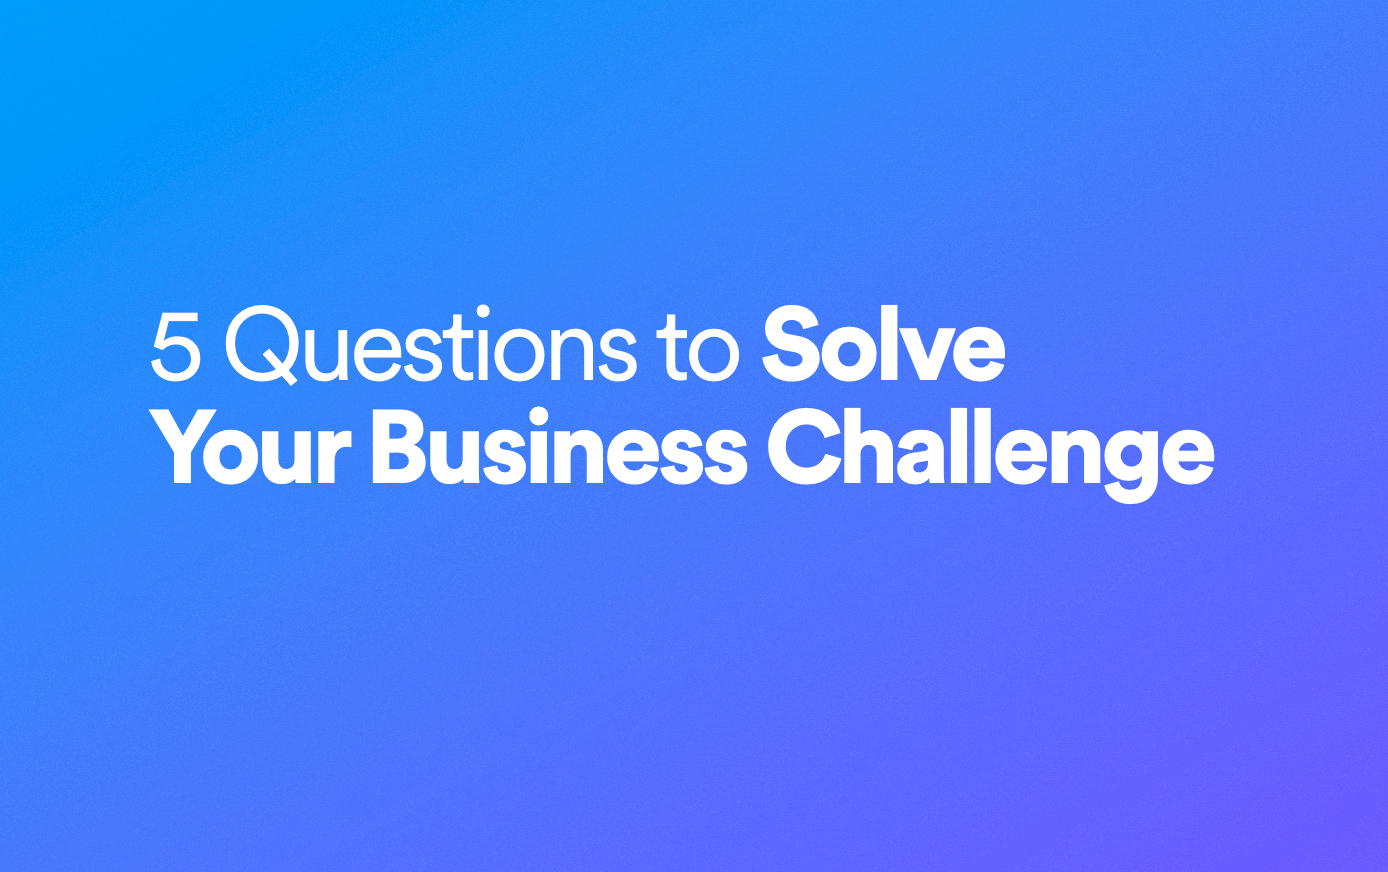 5 Questions to Solve Your Business Challenge